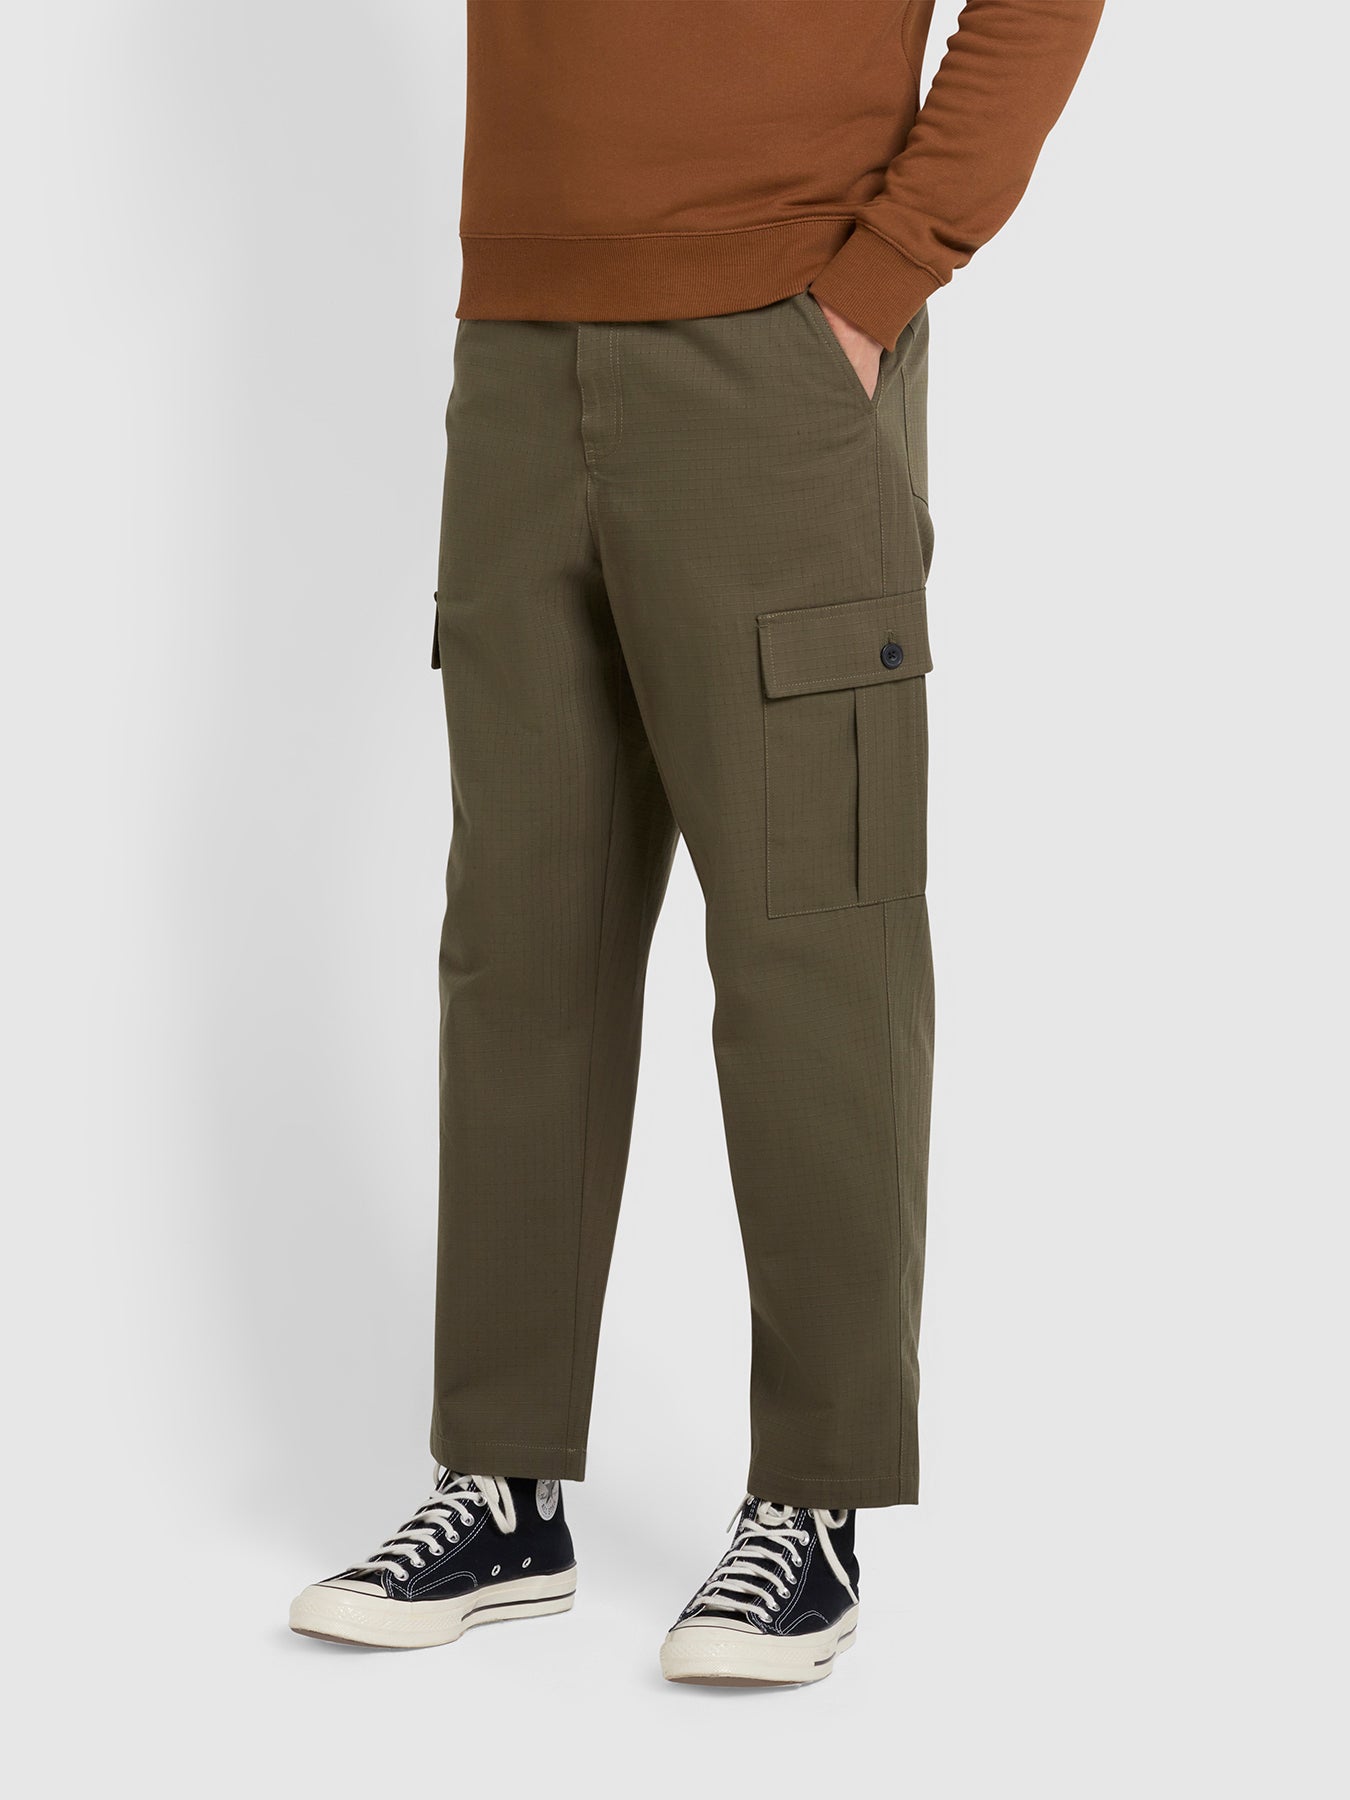 View Hawtin Relaxed Fit Twill Cargo Trousers In Olive Green information